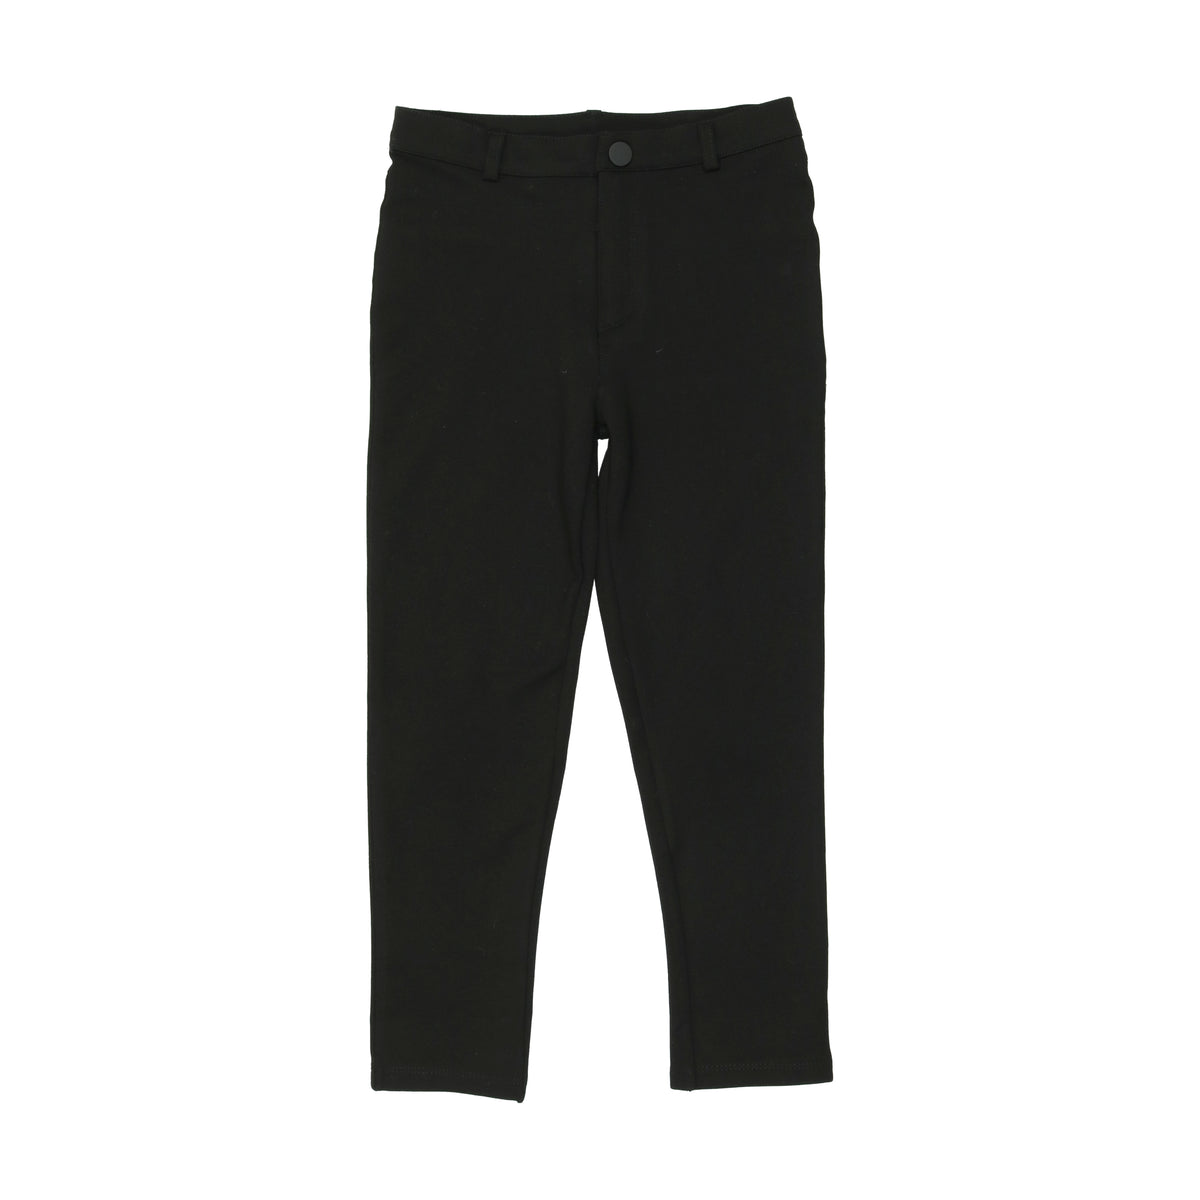 Stretch woolen pants with logo band in Black for Boys